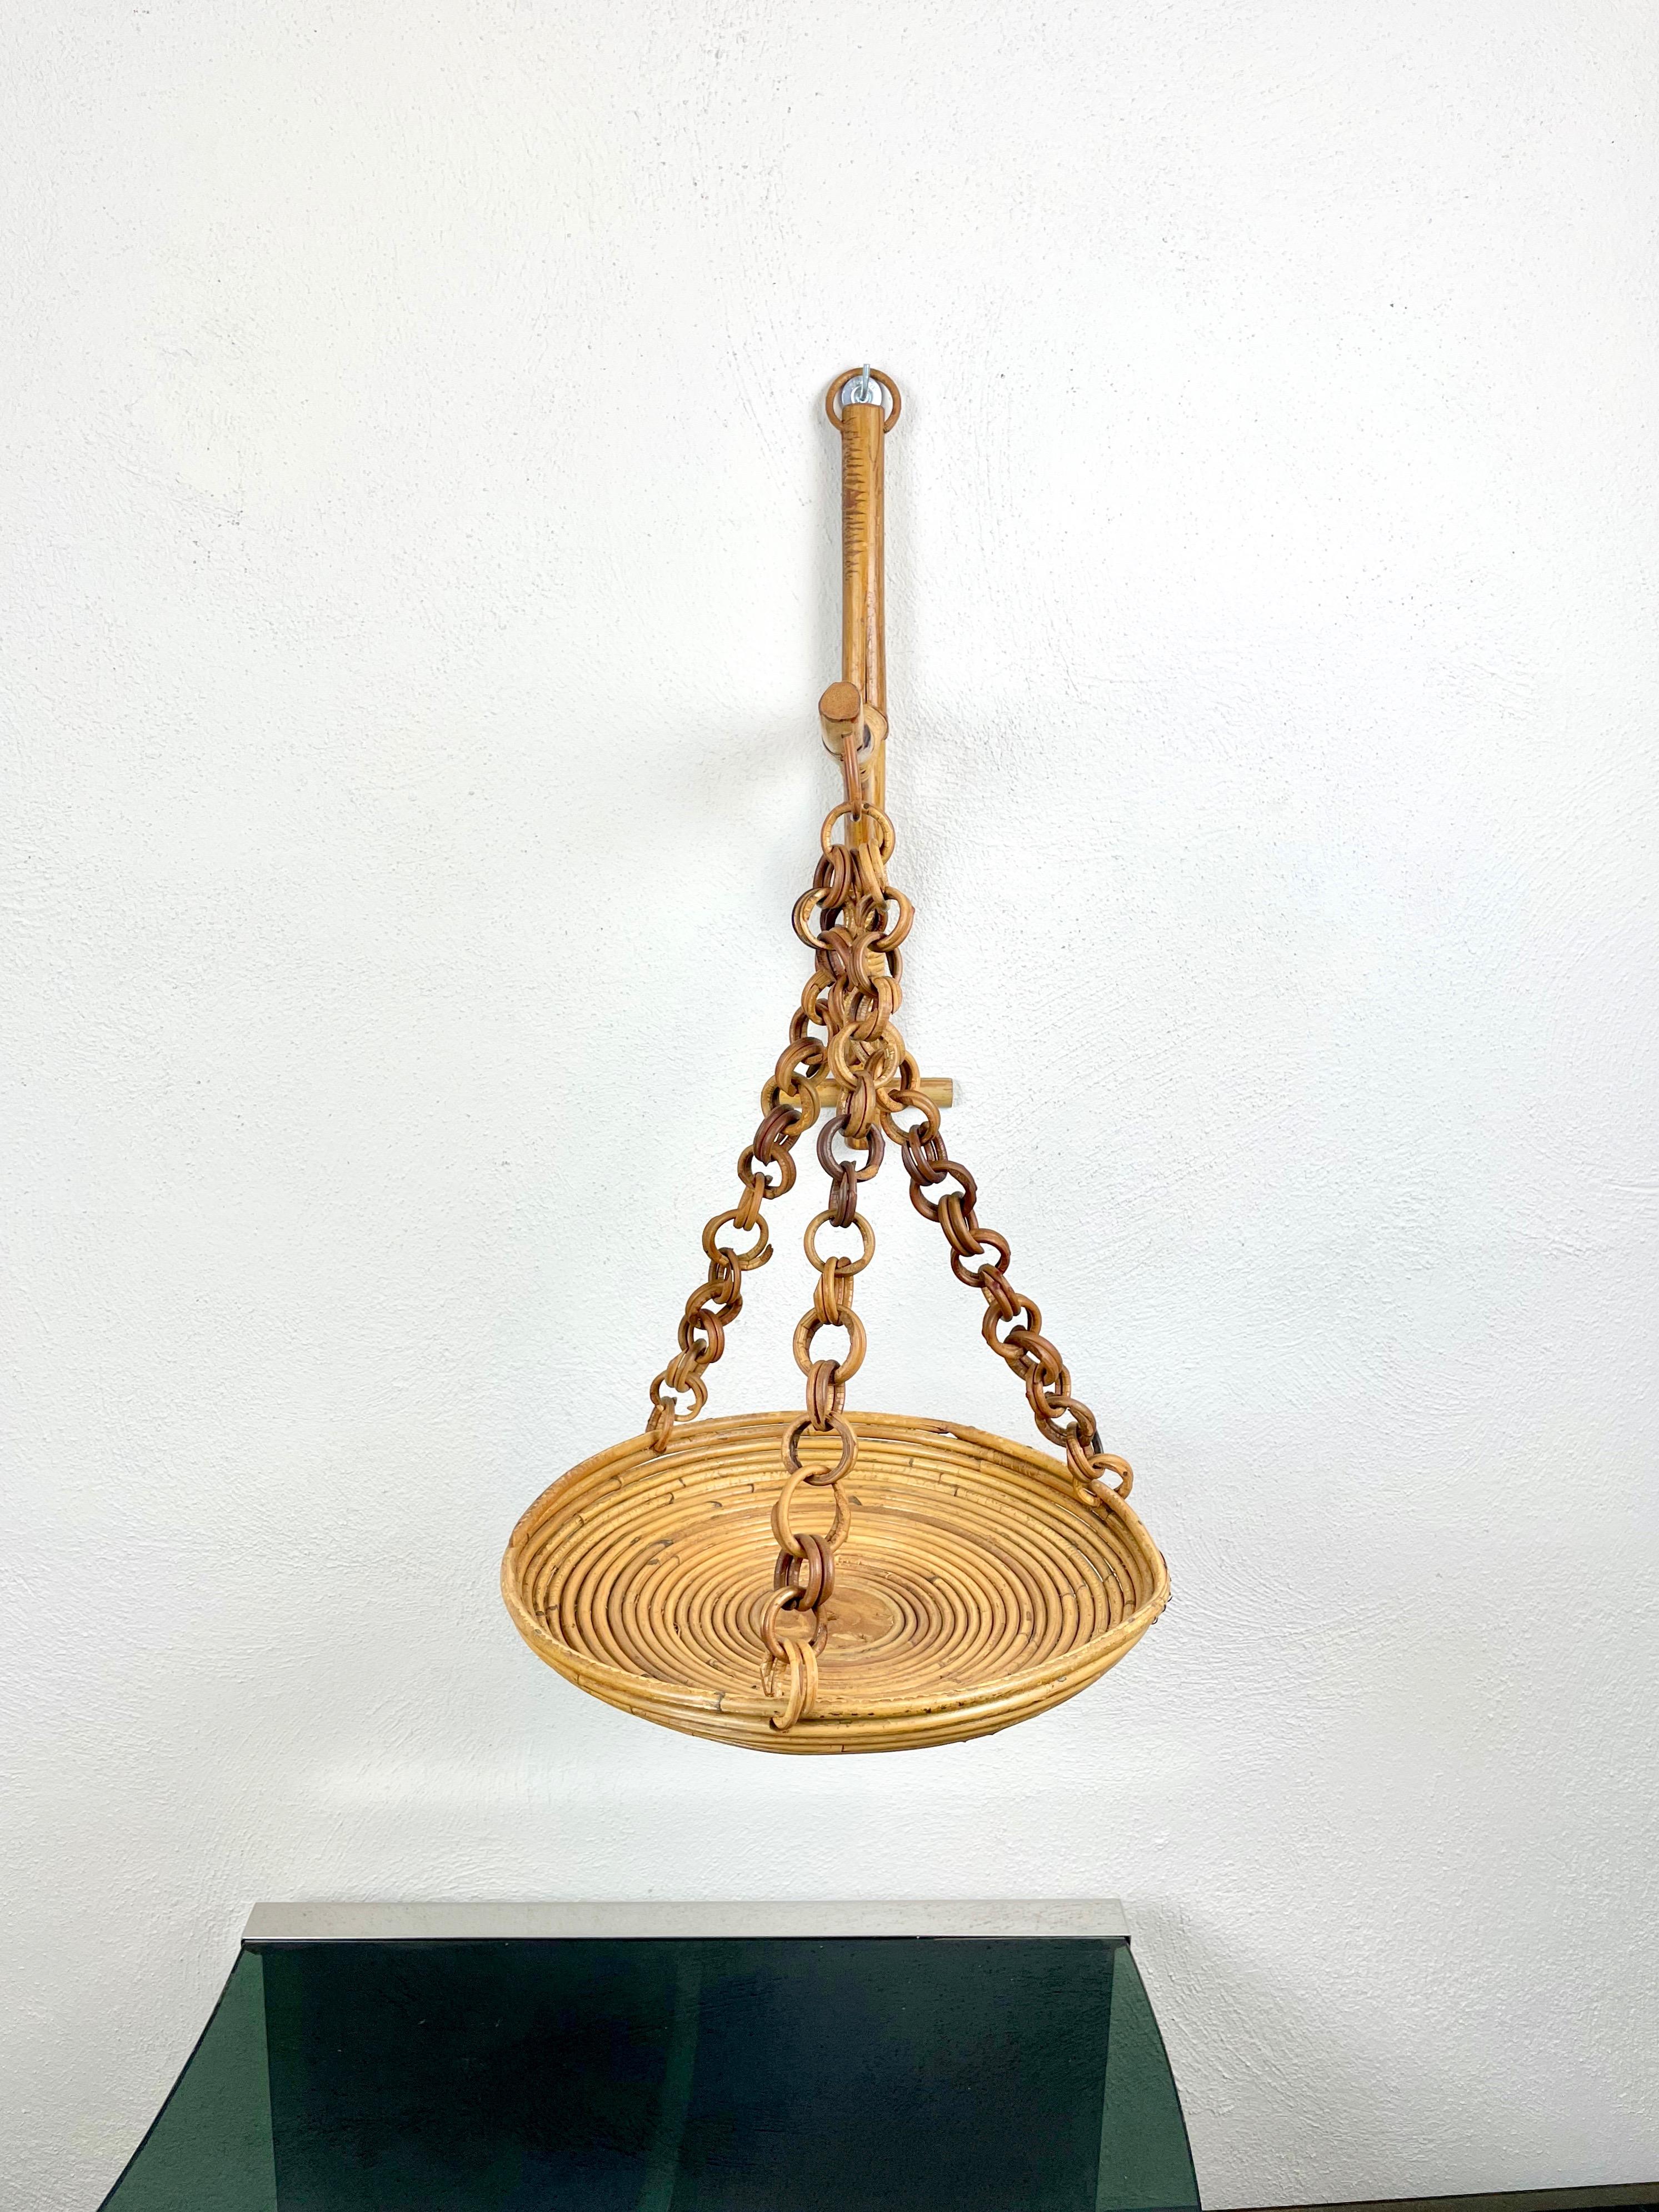 Rattan & Bamboo Wall Stand Flower Plant Holder, Italy, 1960s For Sale 2